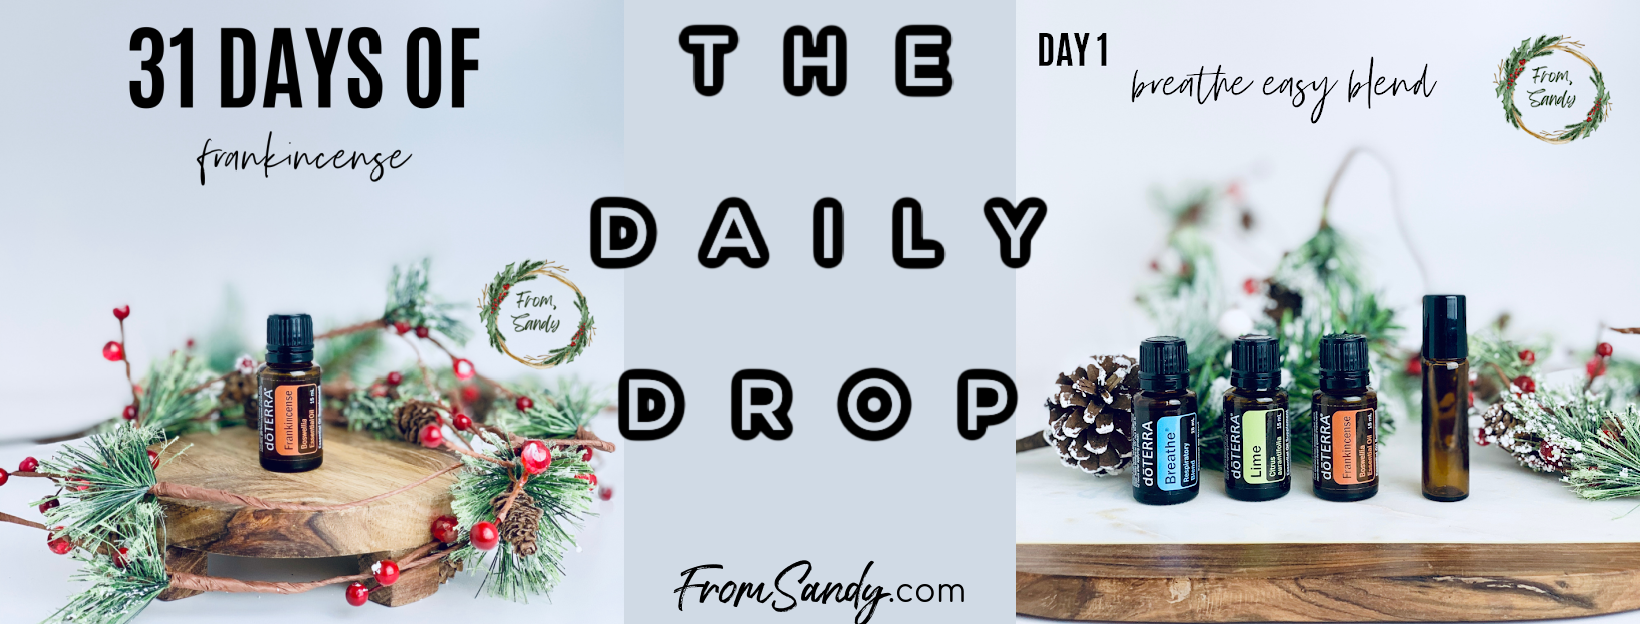 Breathe Easy Blend (31 Days of Frankincense: Day 1), From Sandy